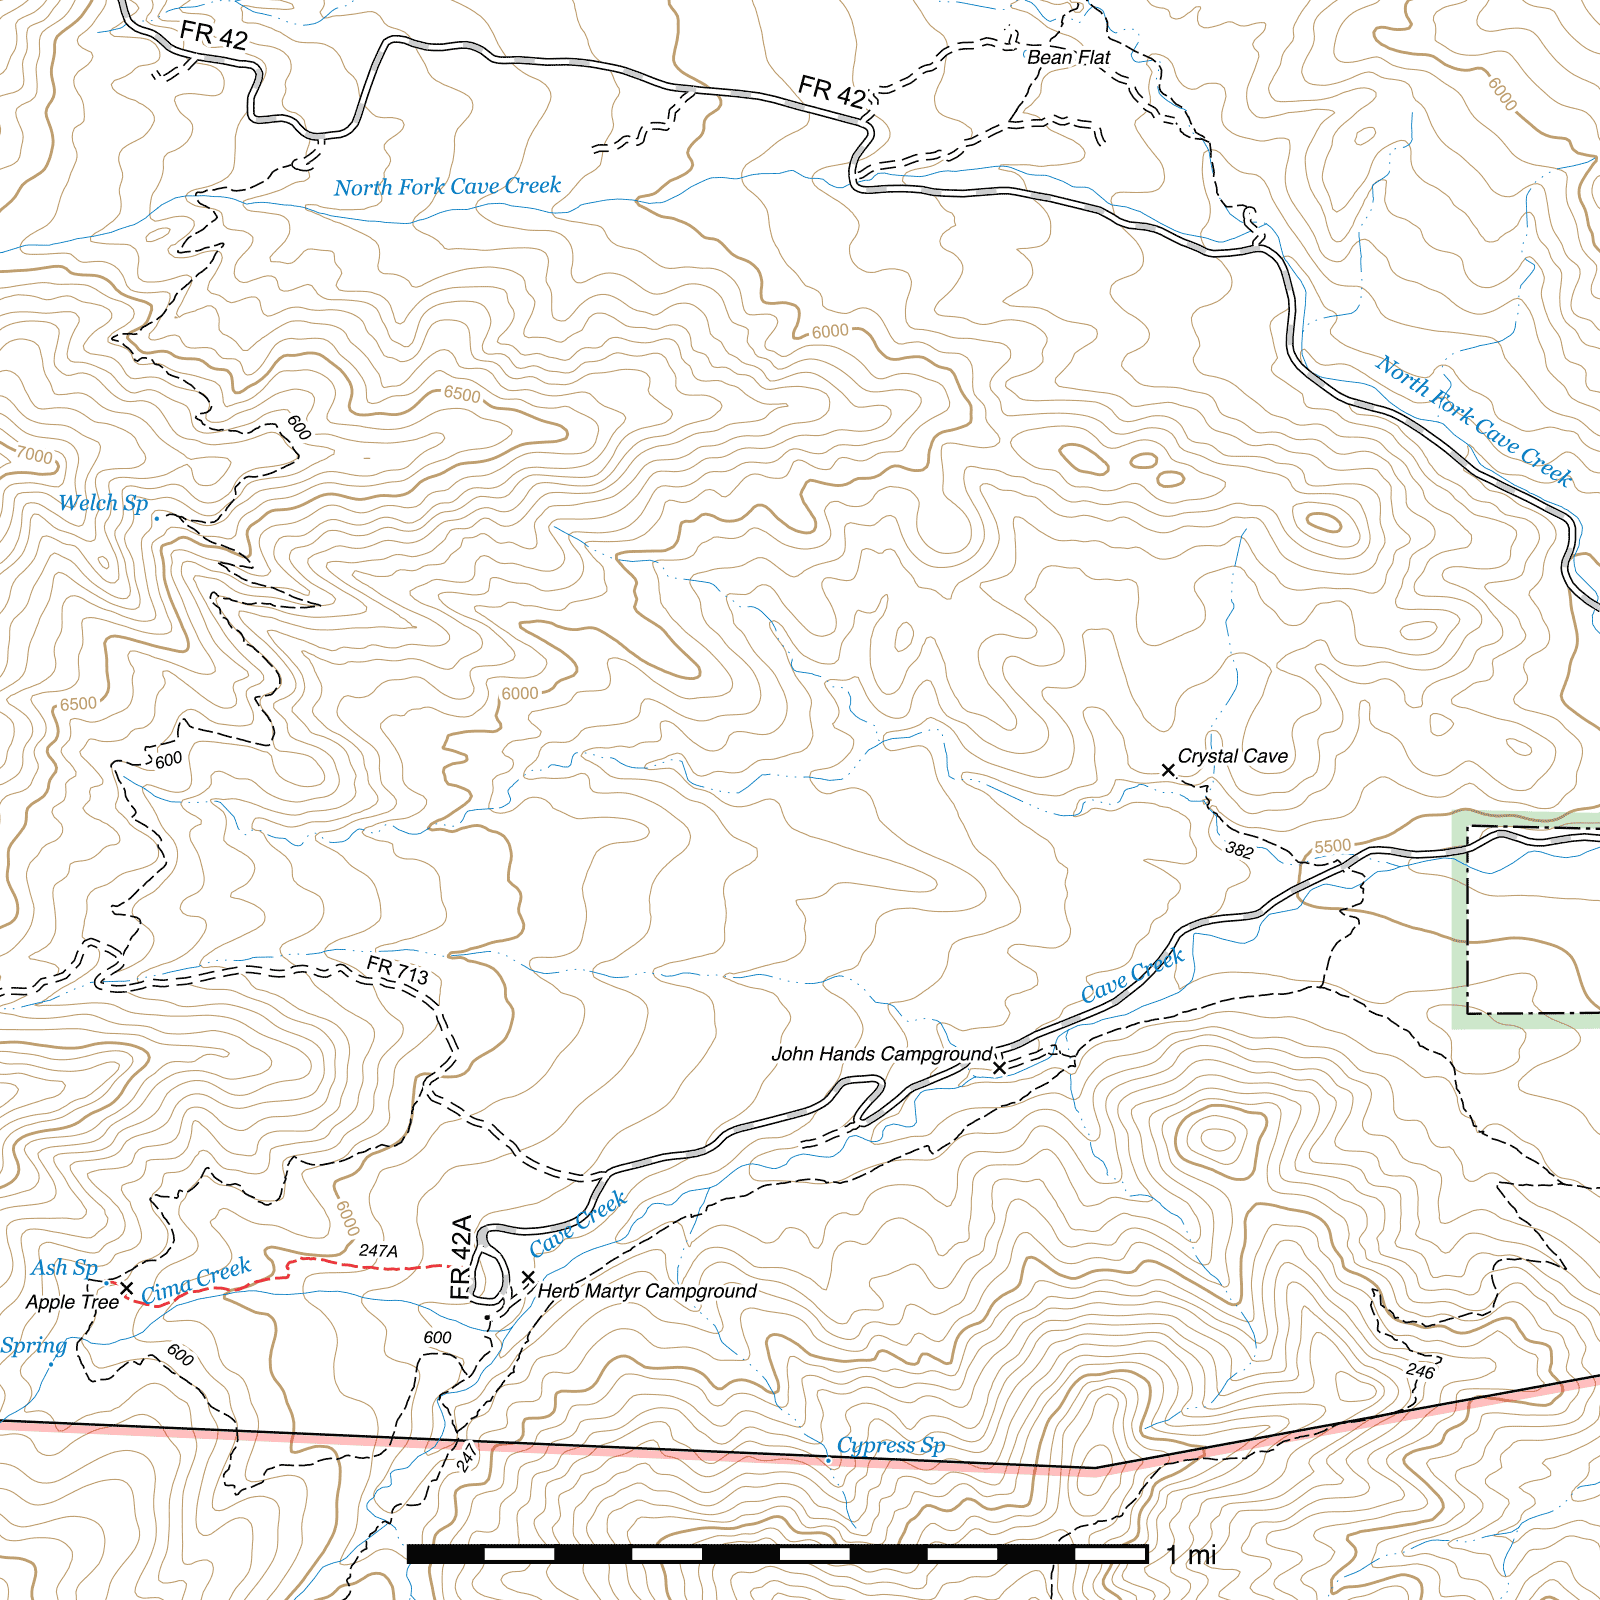 Topographic map of Ash Spring Trail #247A